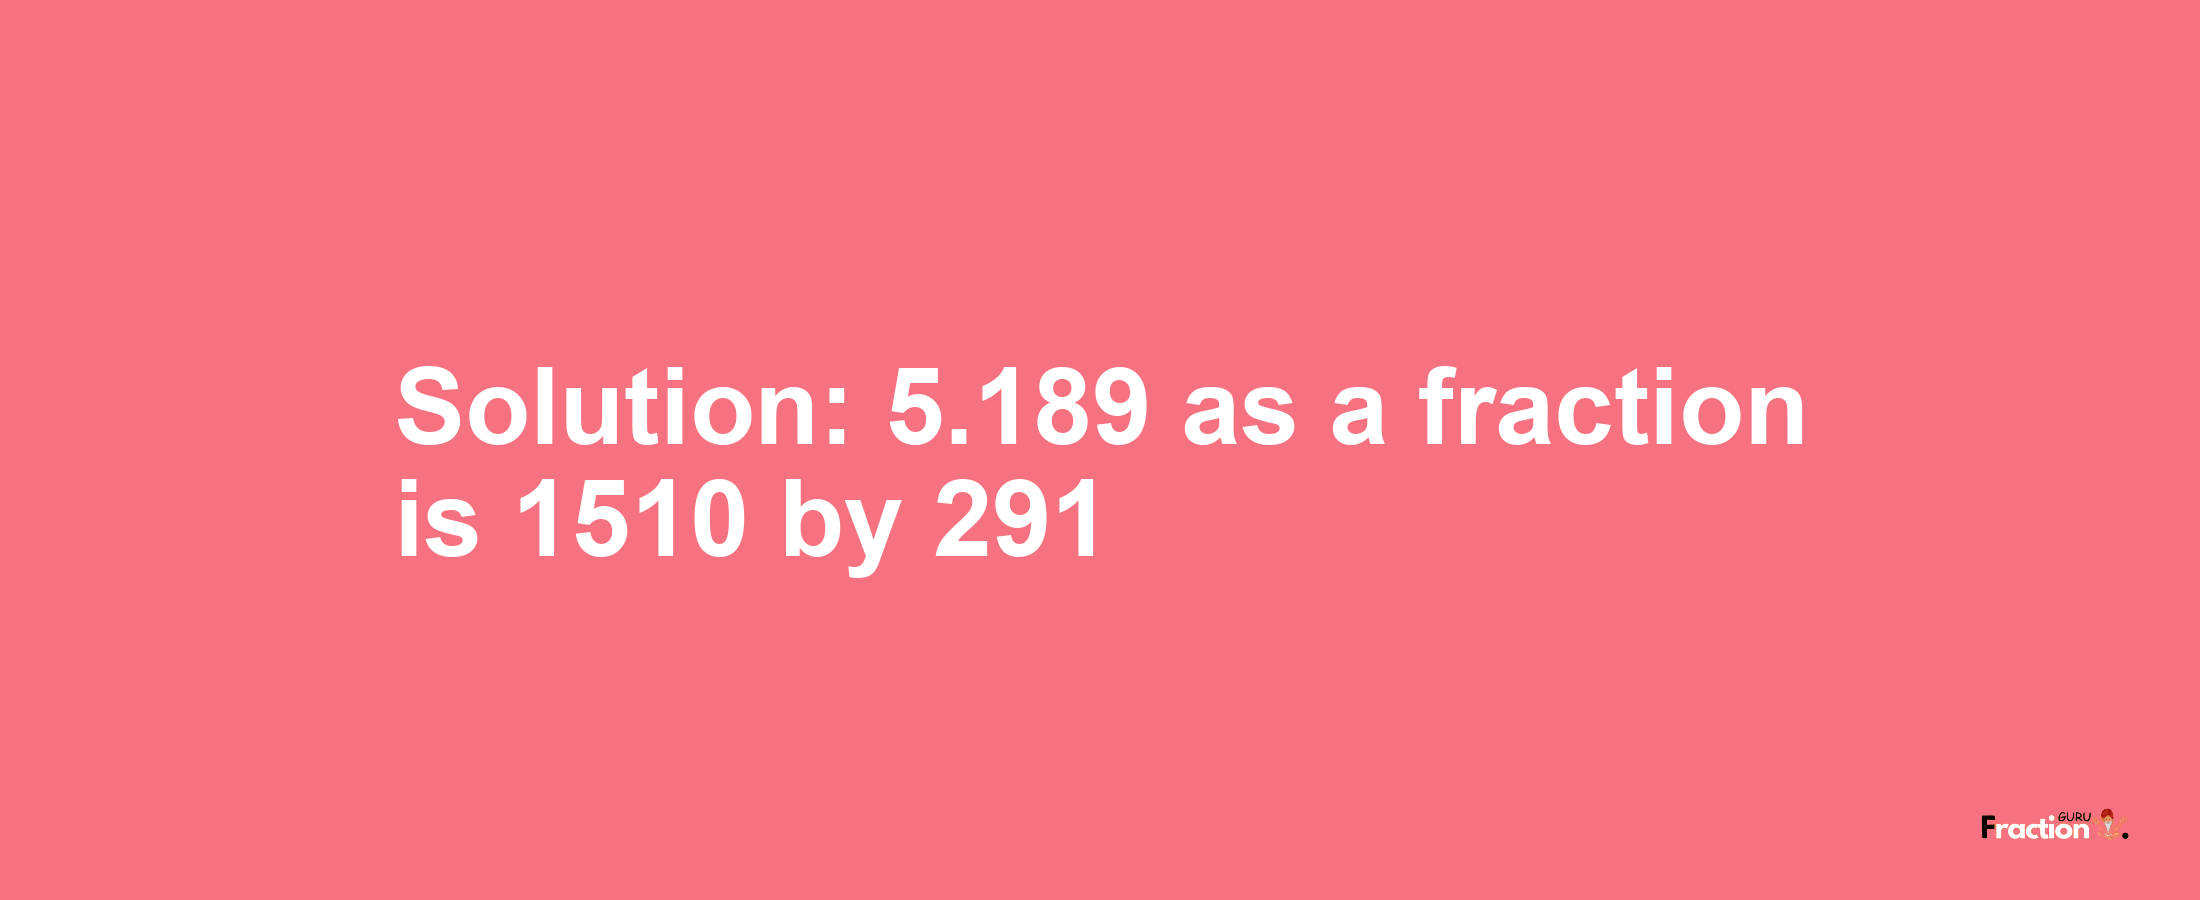 Solution:5.189 as a fraction is 1510/291